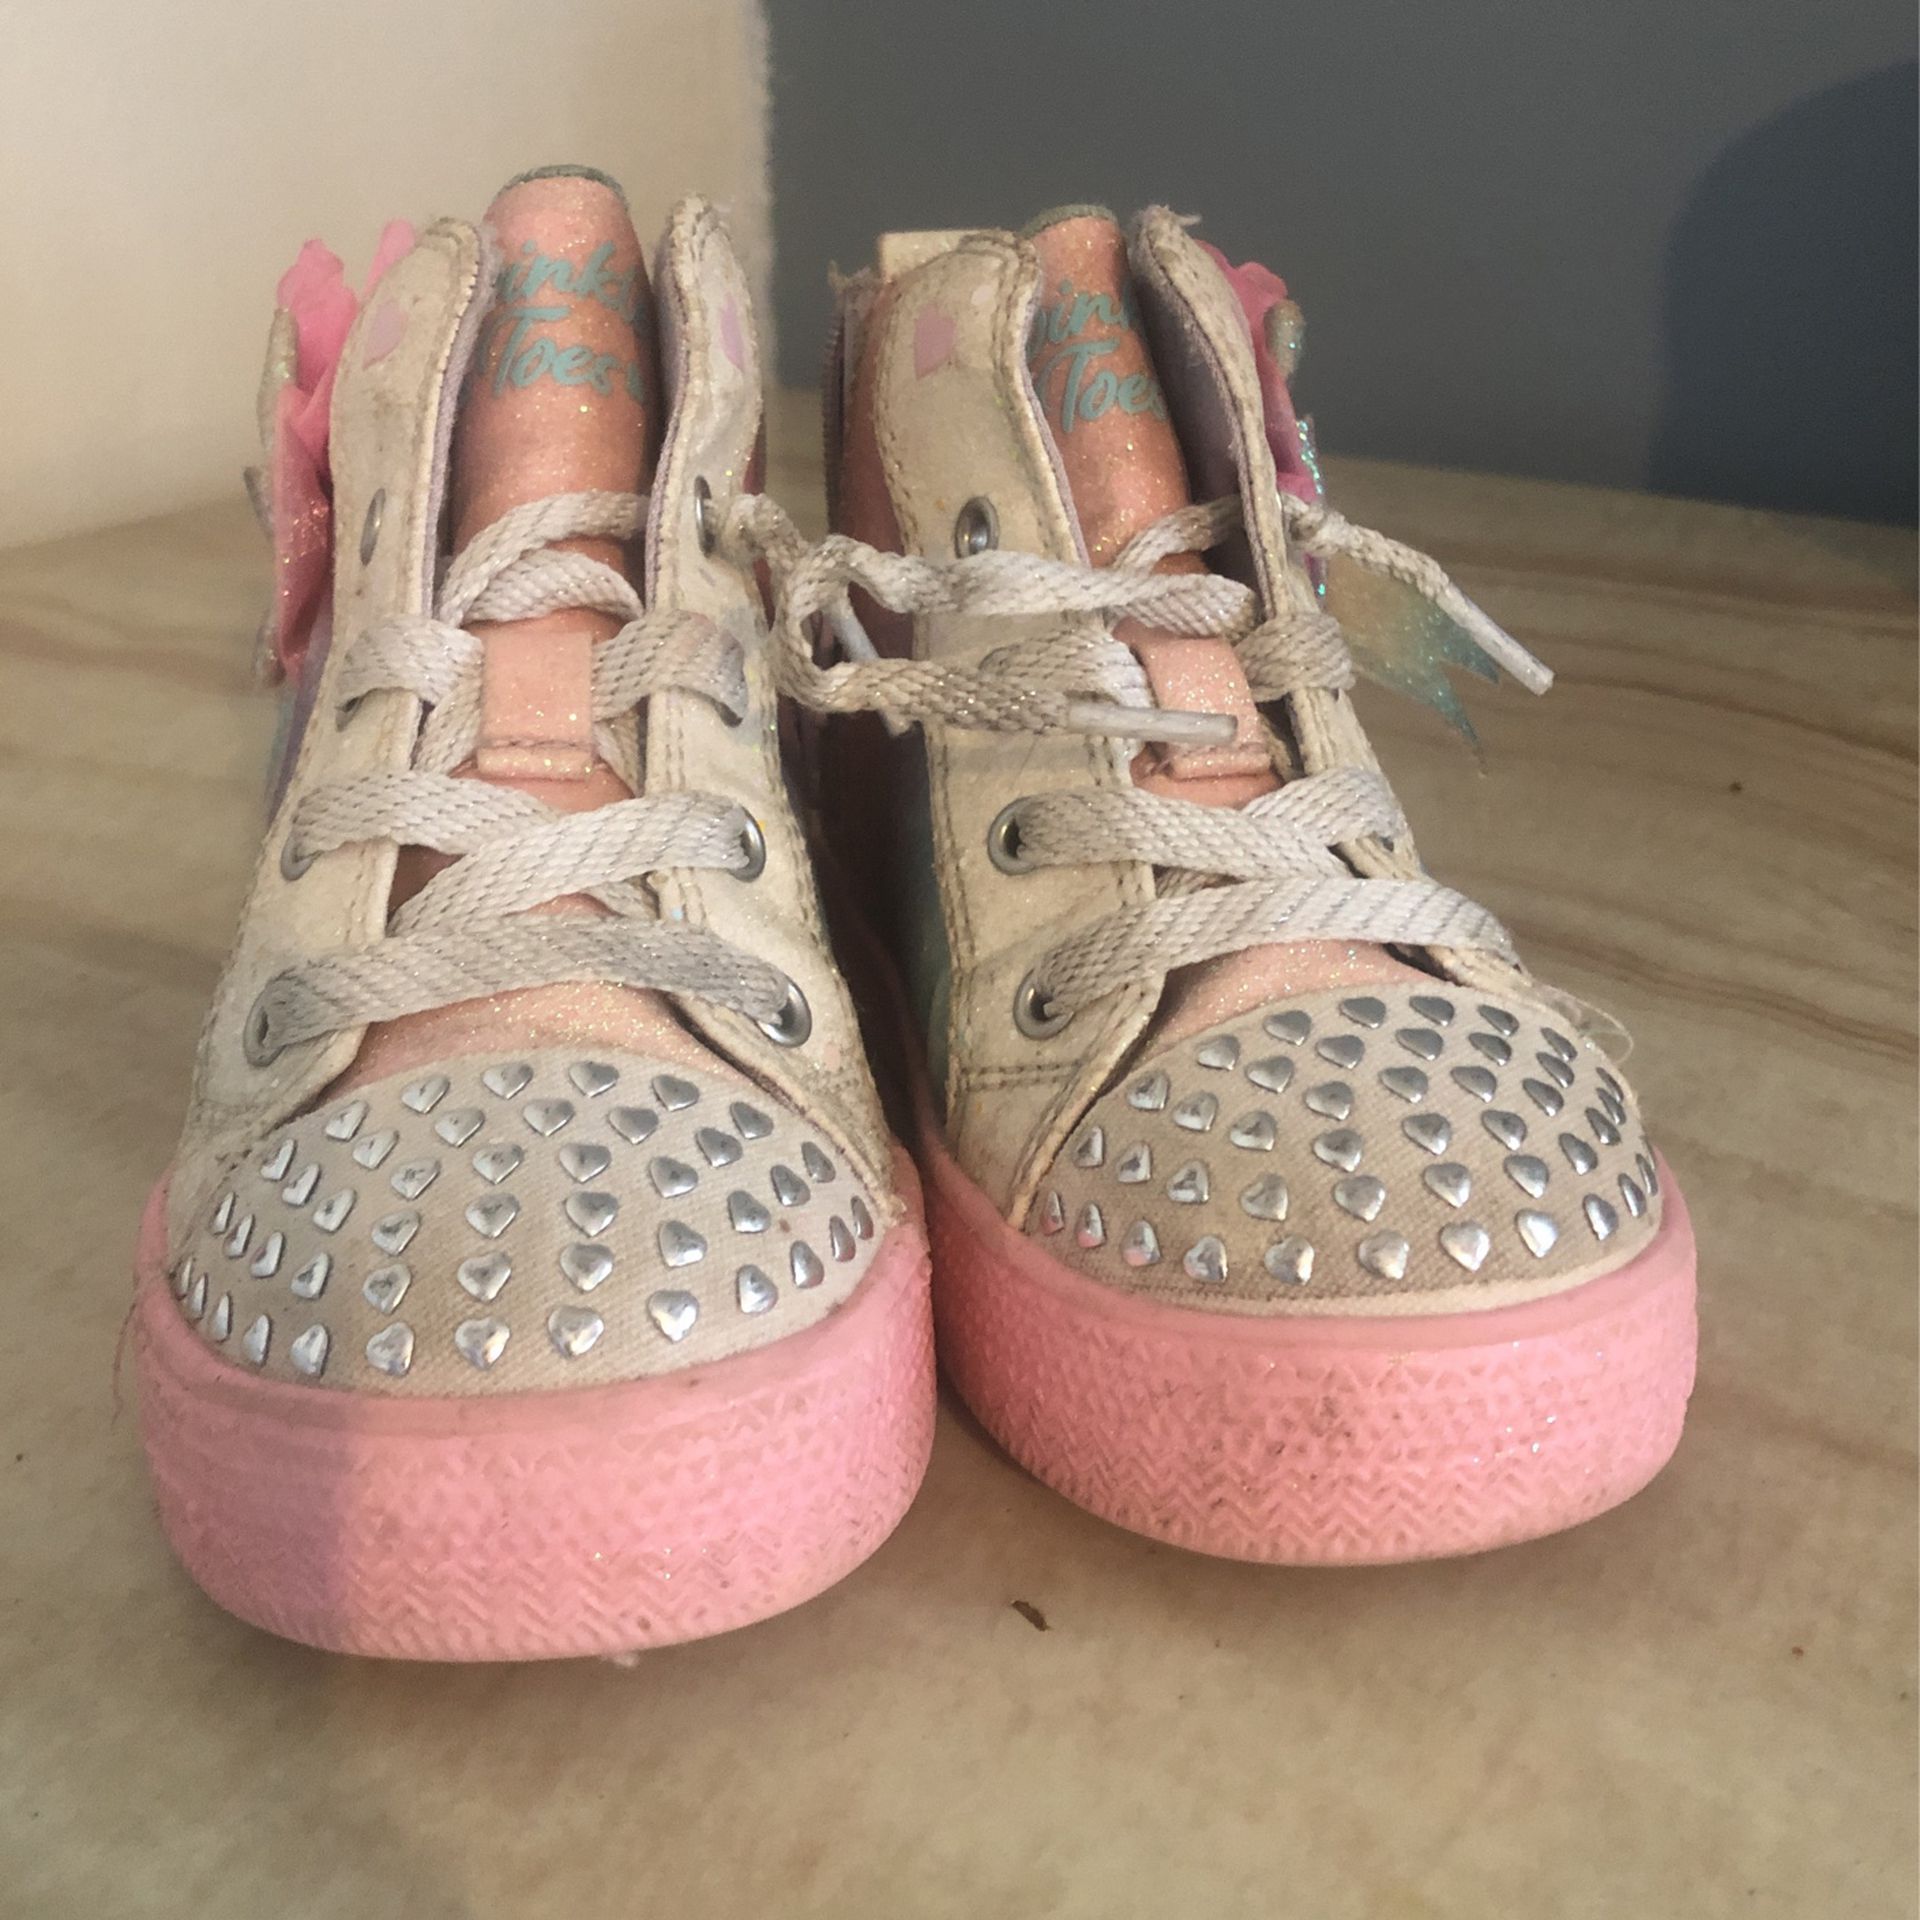 Skechers Twinkle Toes Size 8 for in Chicago, - OfferUp